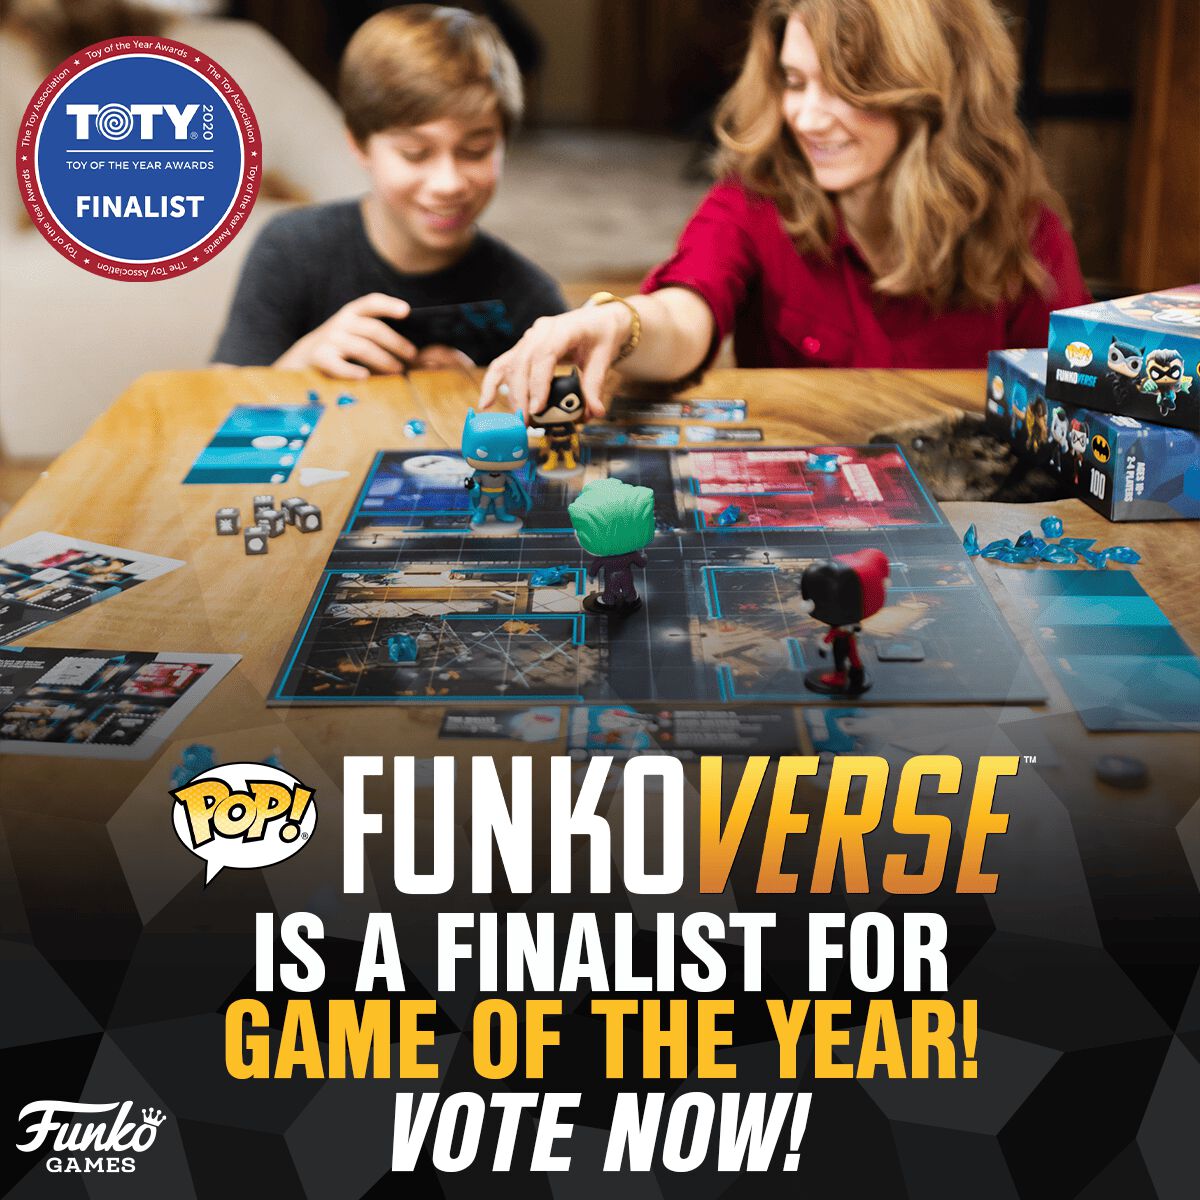 Vote for Funkoverse for Game of the Year!